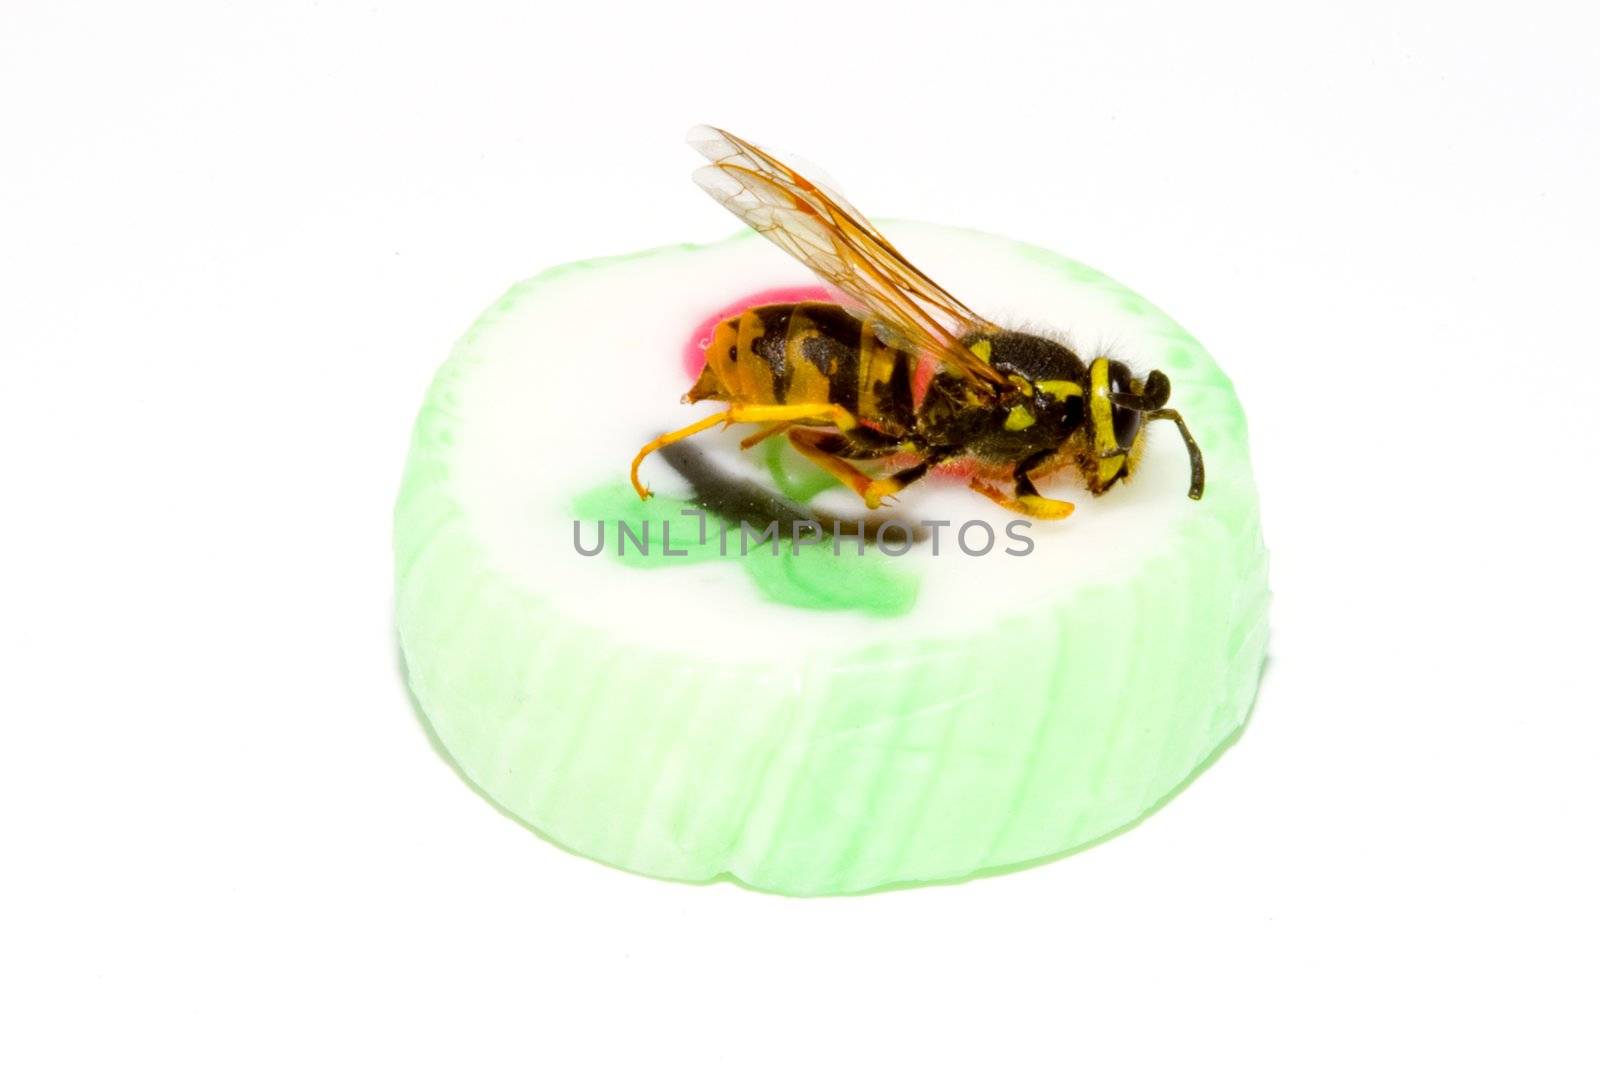 a common wasp on a piece of sweet candy - Vespula vulgaris